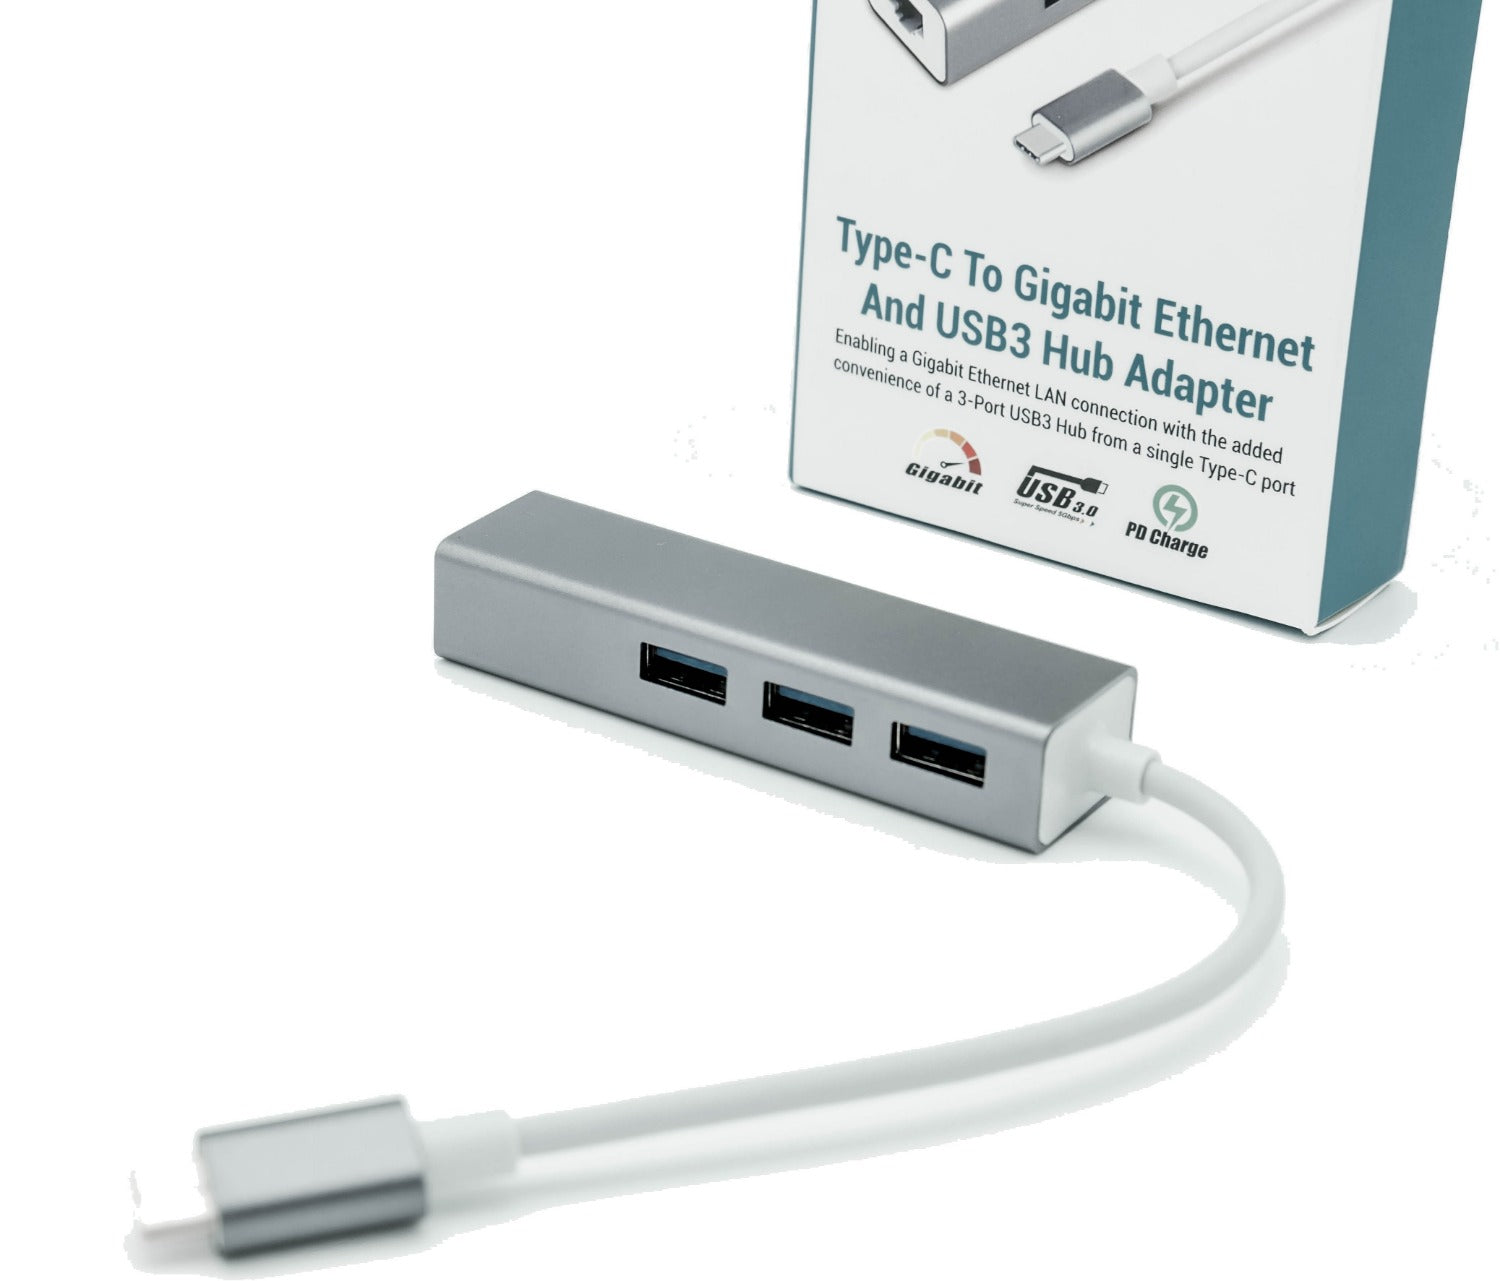 Gigabit LAN and USB3 hub adapter for Type-C devices